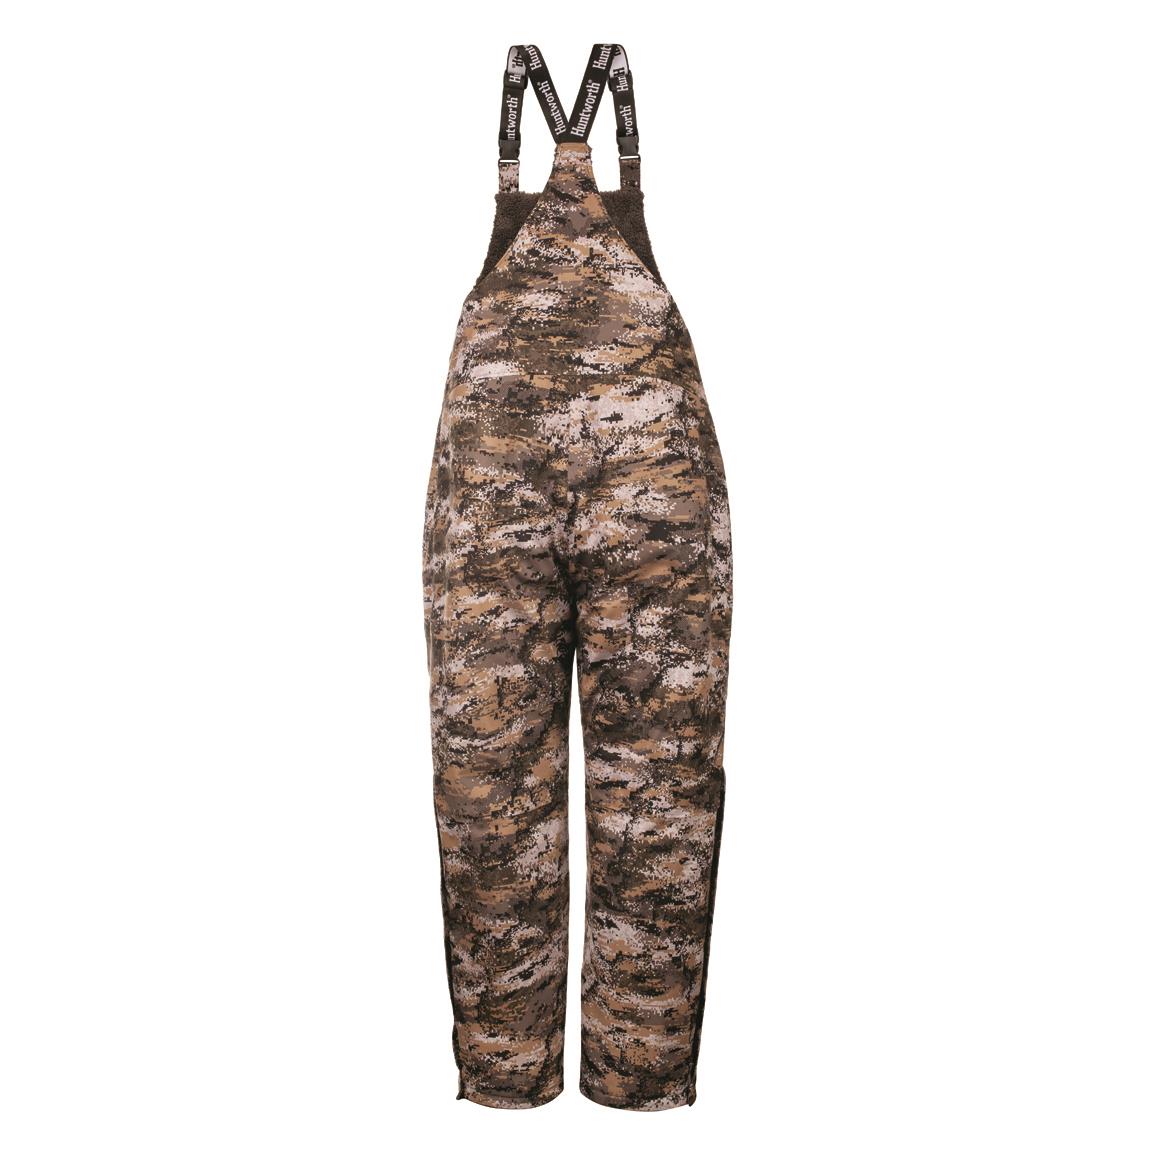 WRANGLER Insulated Pants, Overalls & Coveralls | Men's Clothing & Outerwear  | Clothing | Sportsman's Guide